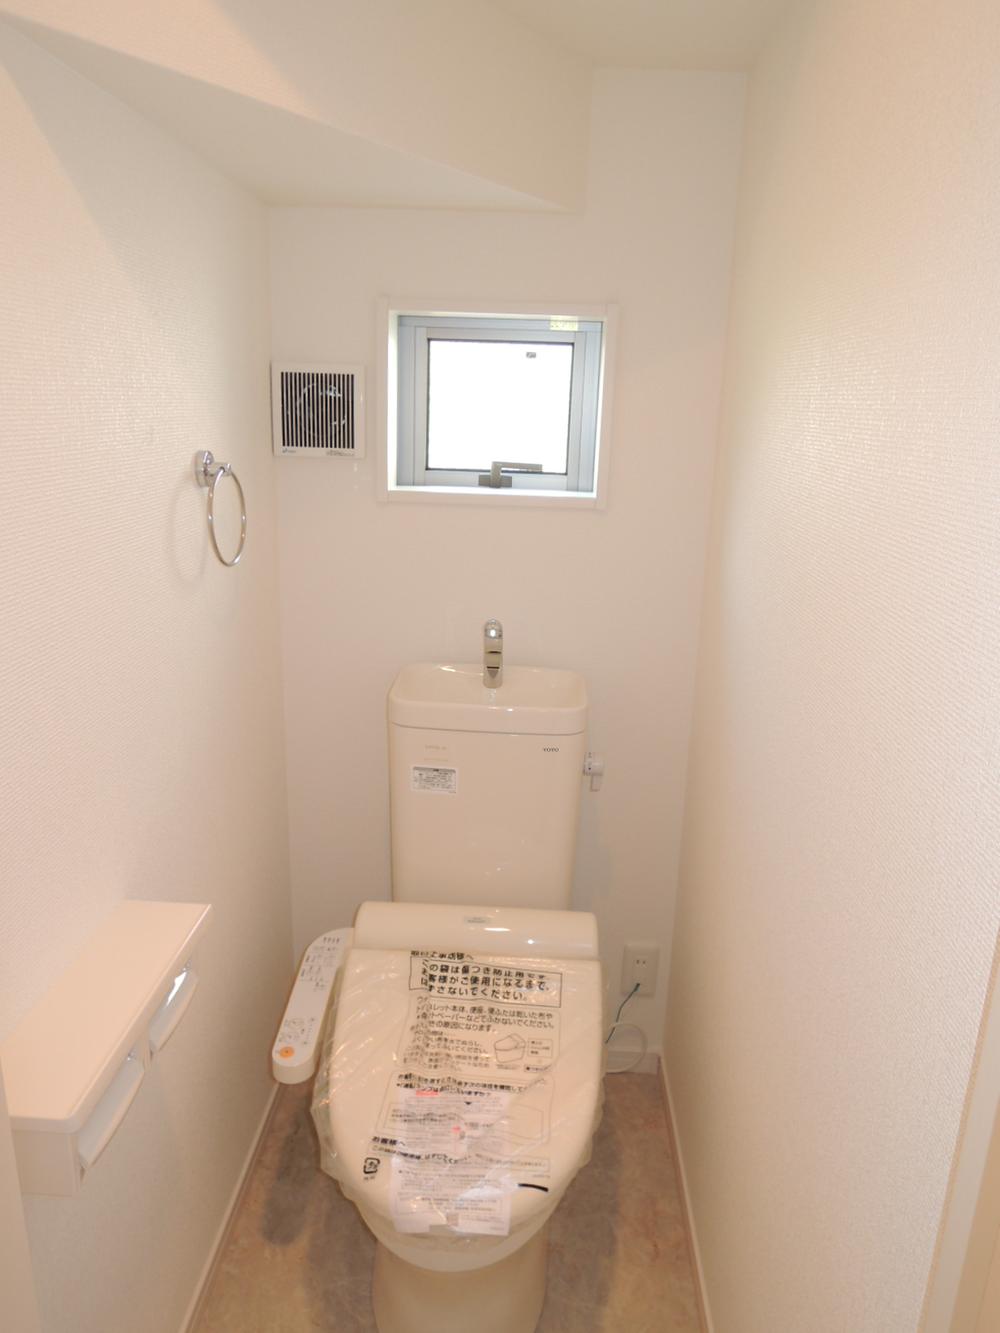 Same specifications photos (Other introspection). Toilet (same specifications)